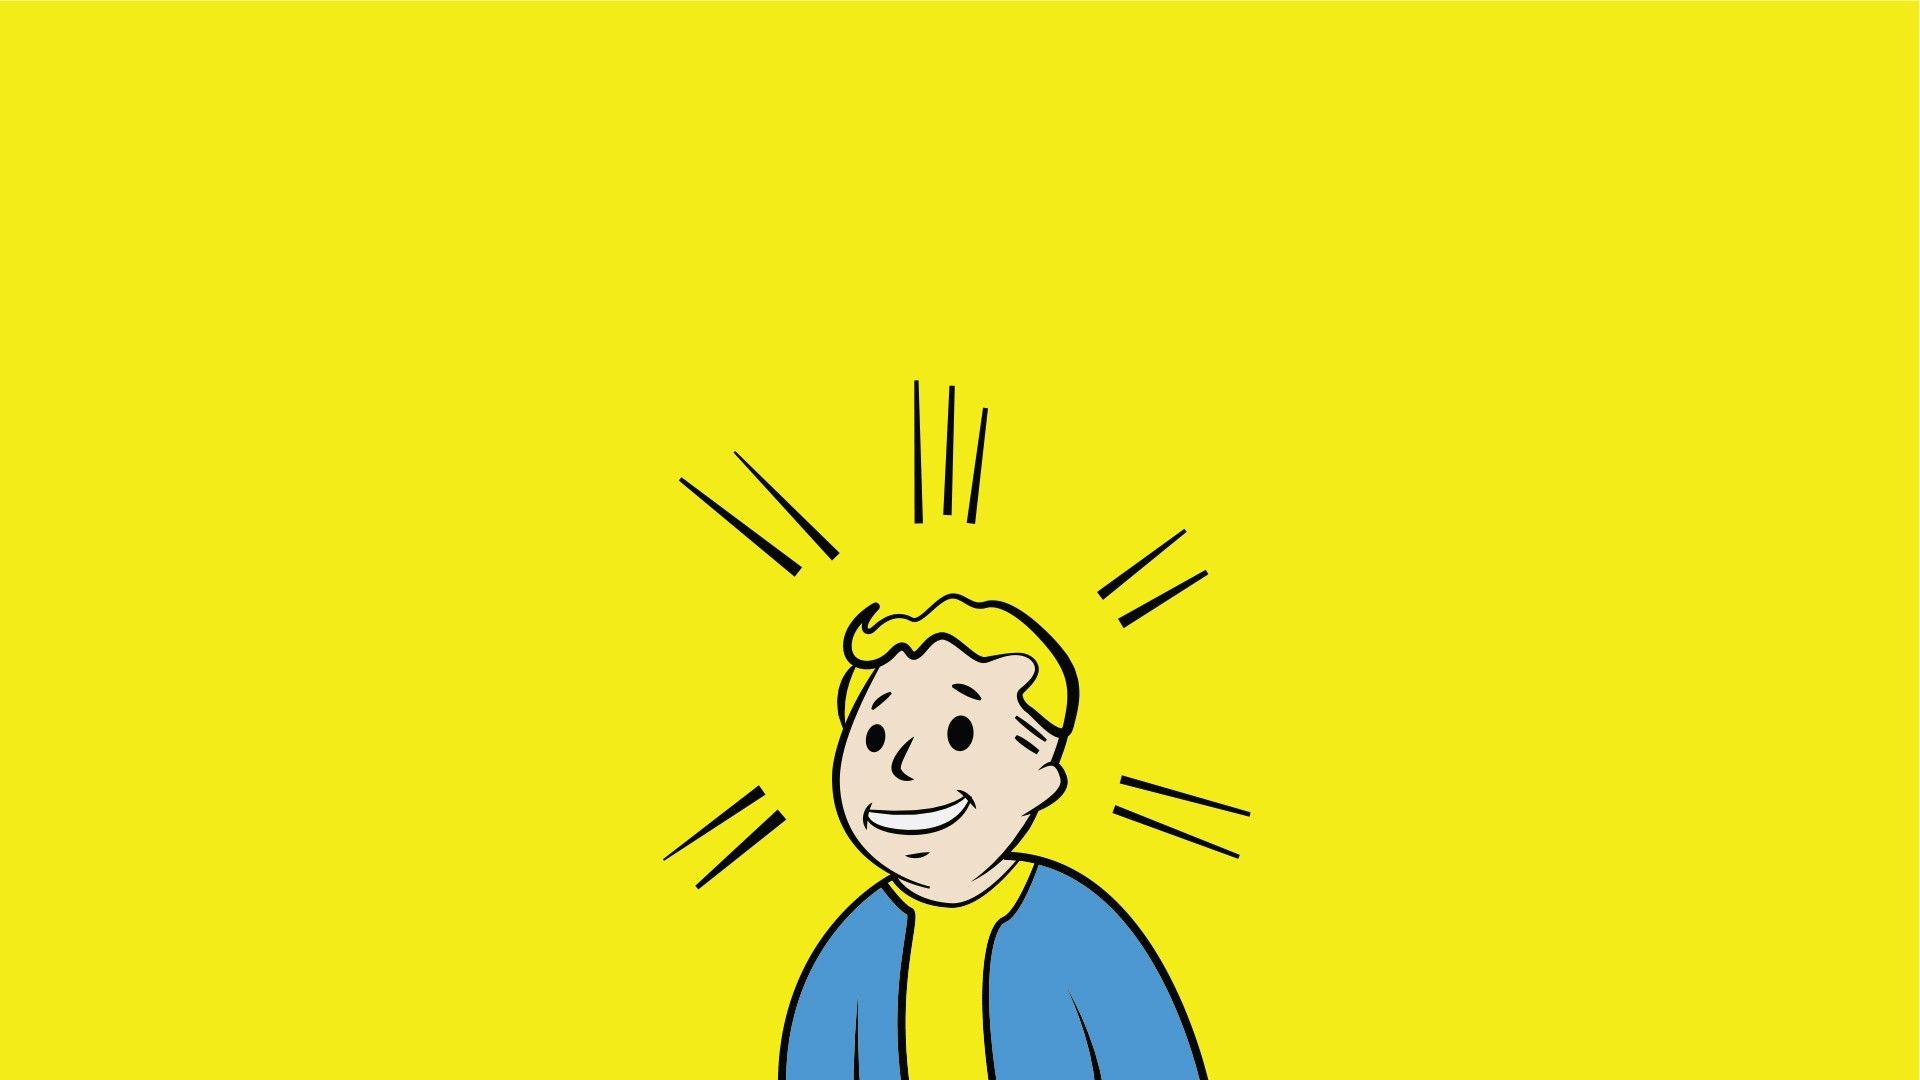 video Games, Fallout, Yellow, Blue Wallpaper HD / Desktop and Mobile Background